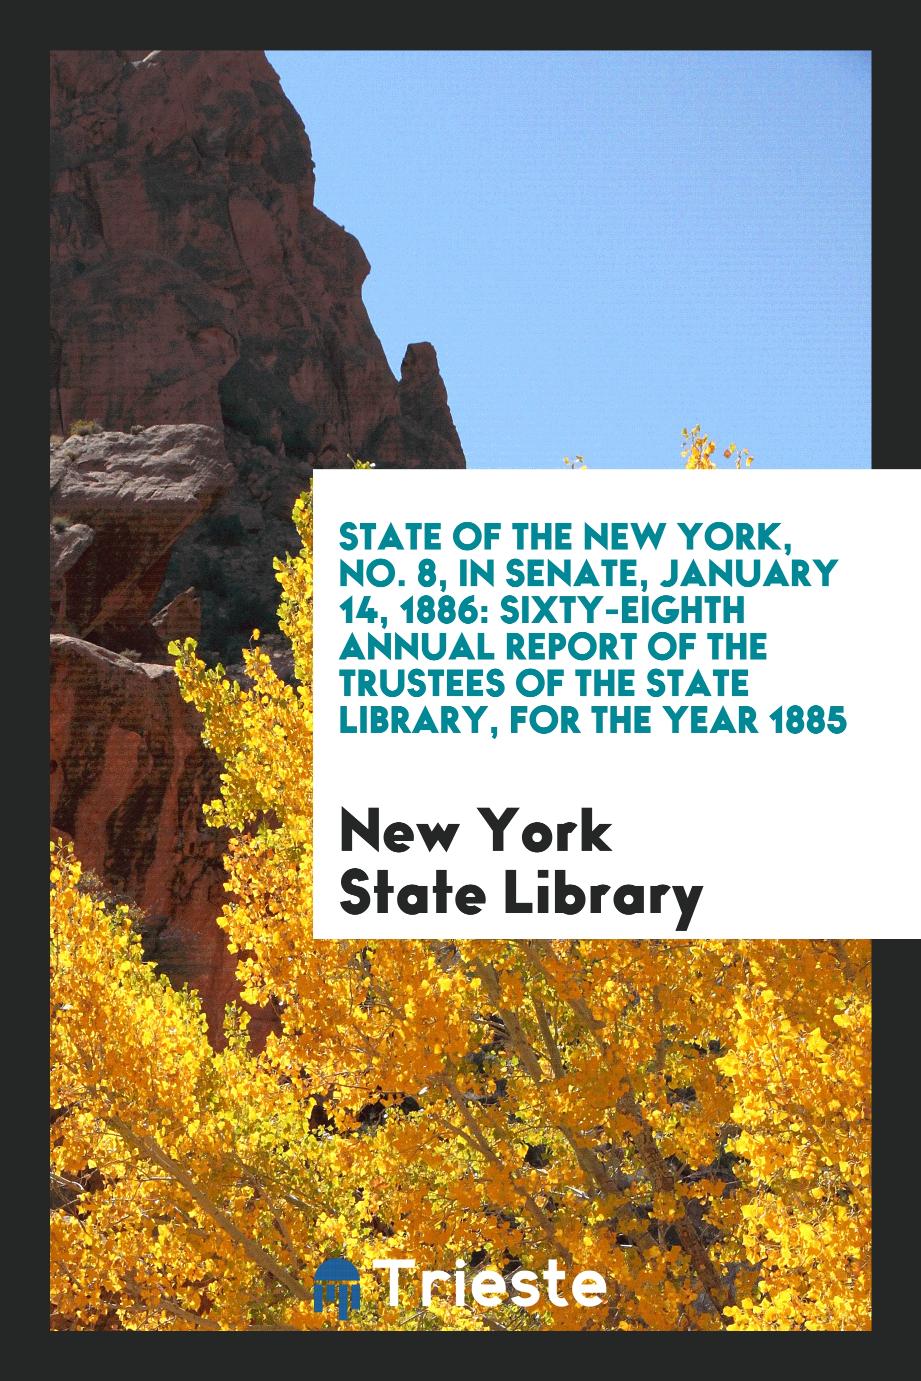 State of the New York, No. 8, In Senate, January 14, 1886: Sixty-Eighth Annual Report of the Trustees of the State Library, for the Year 1885